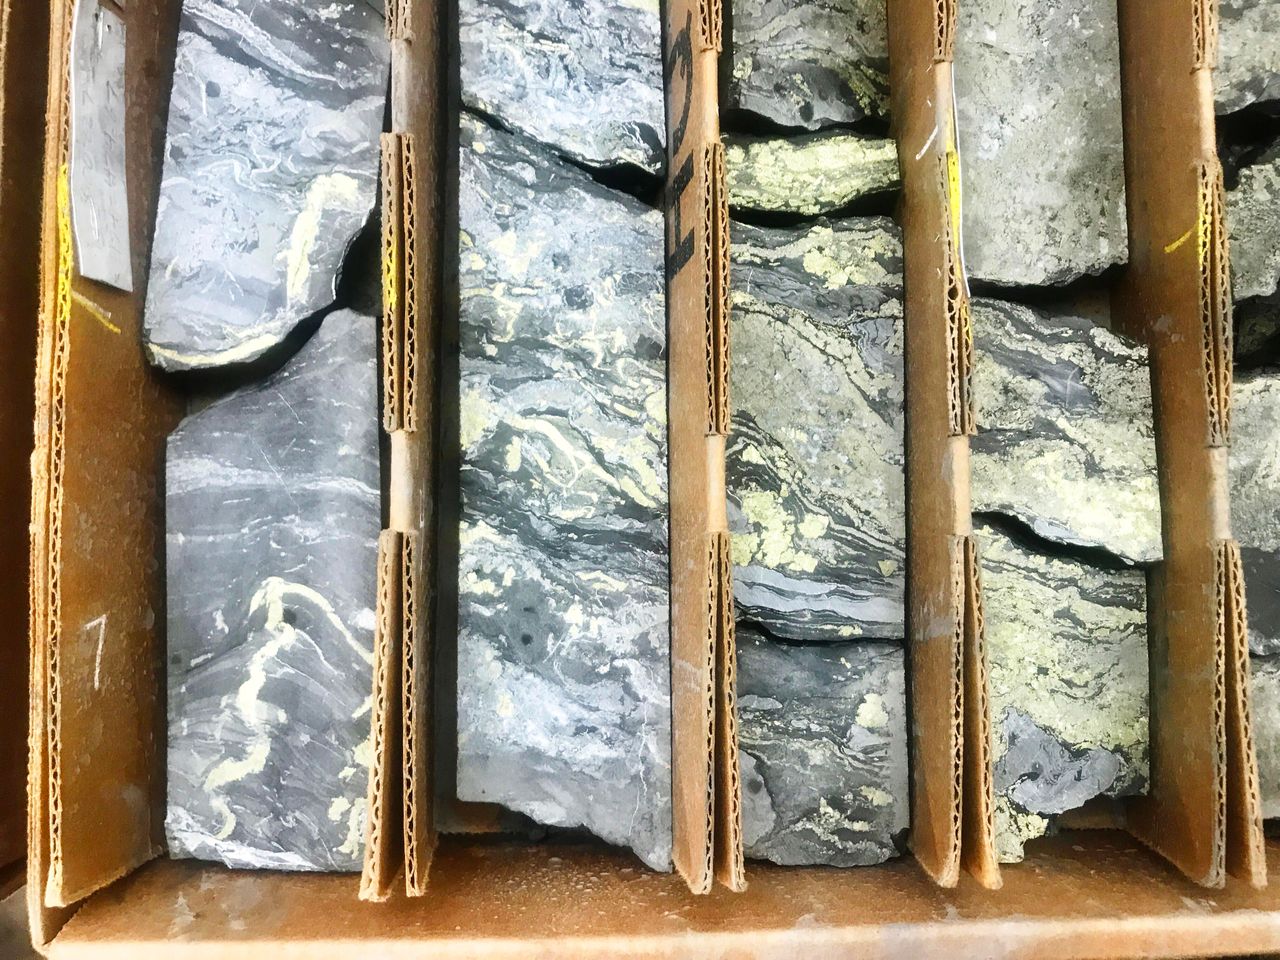 Cores of copper-rich rock that were extracted from the project site. The golden-yellow material is chalcopyrite, a major copper ore mineral.